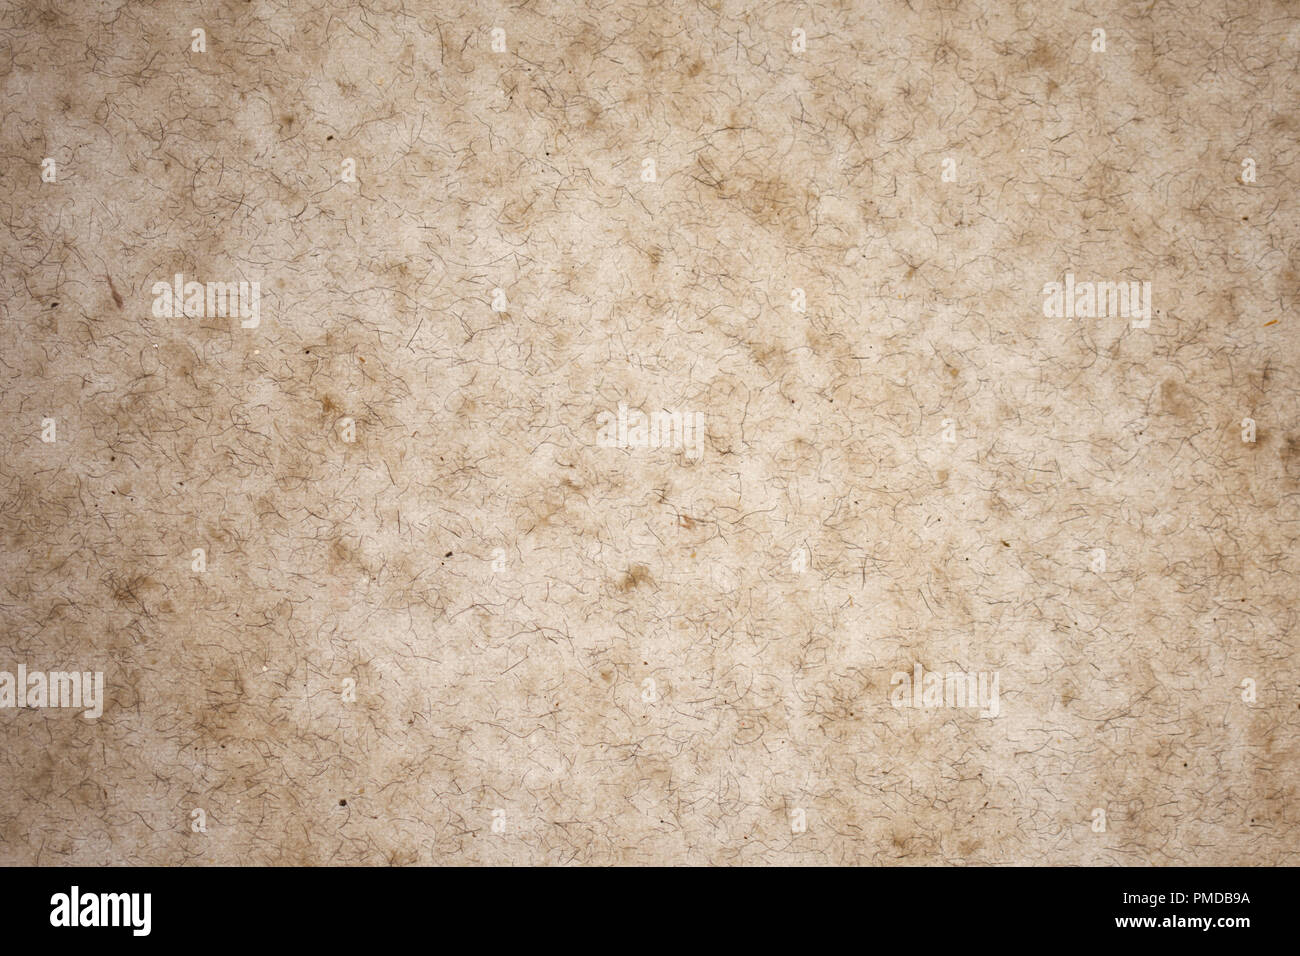 Close-up studio image of backlit handmade paper showing details and textures, backdrop Stock Photo